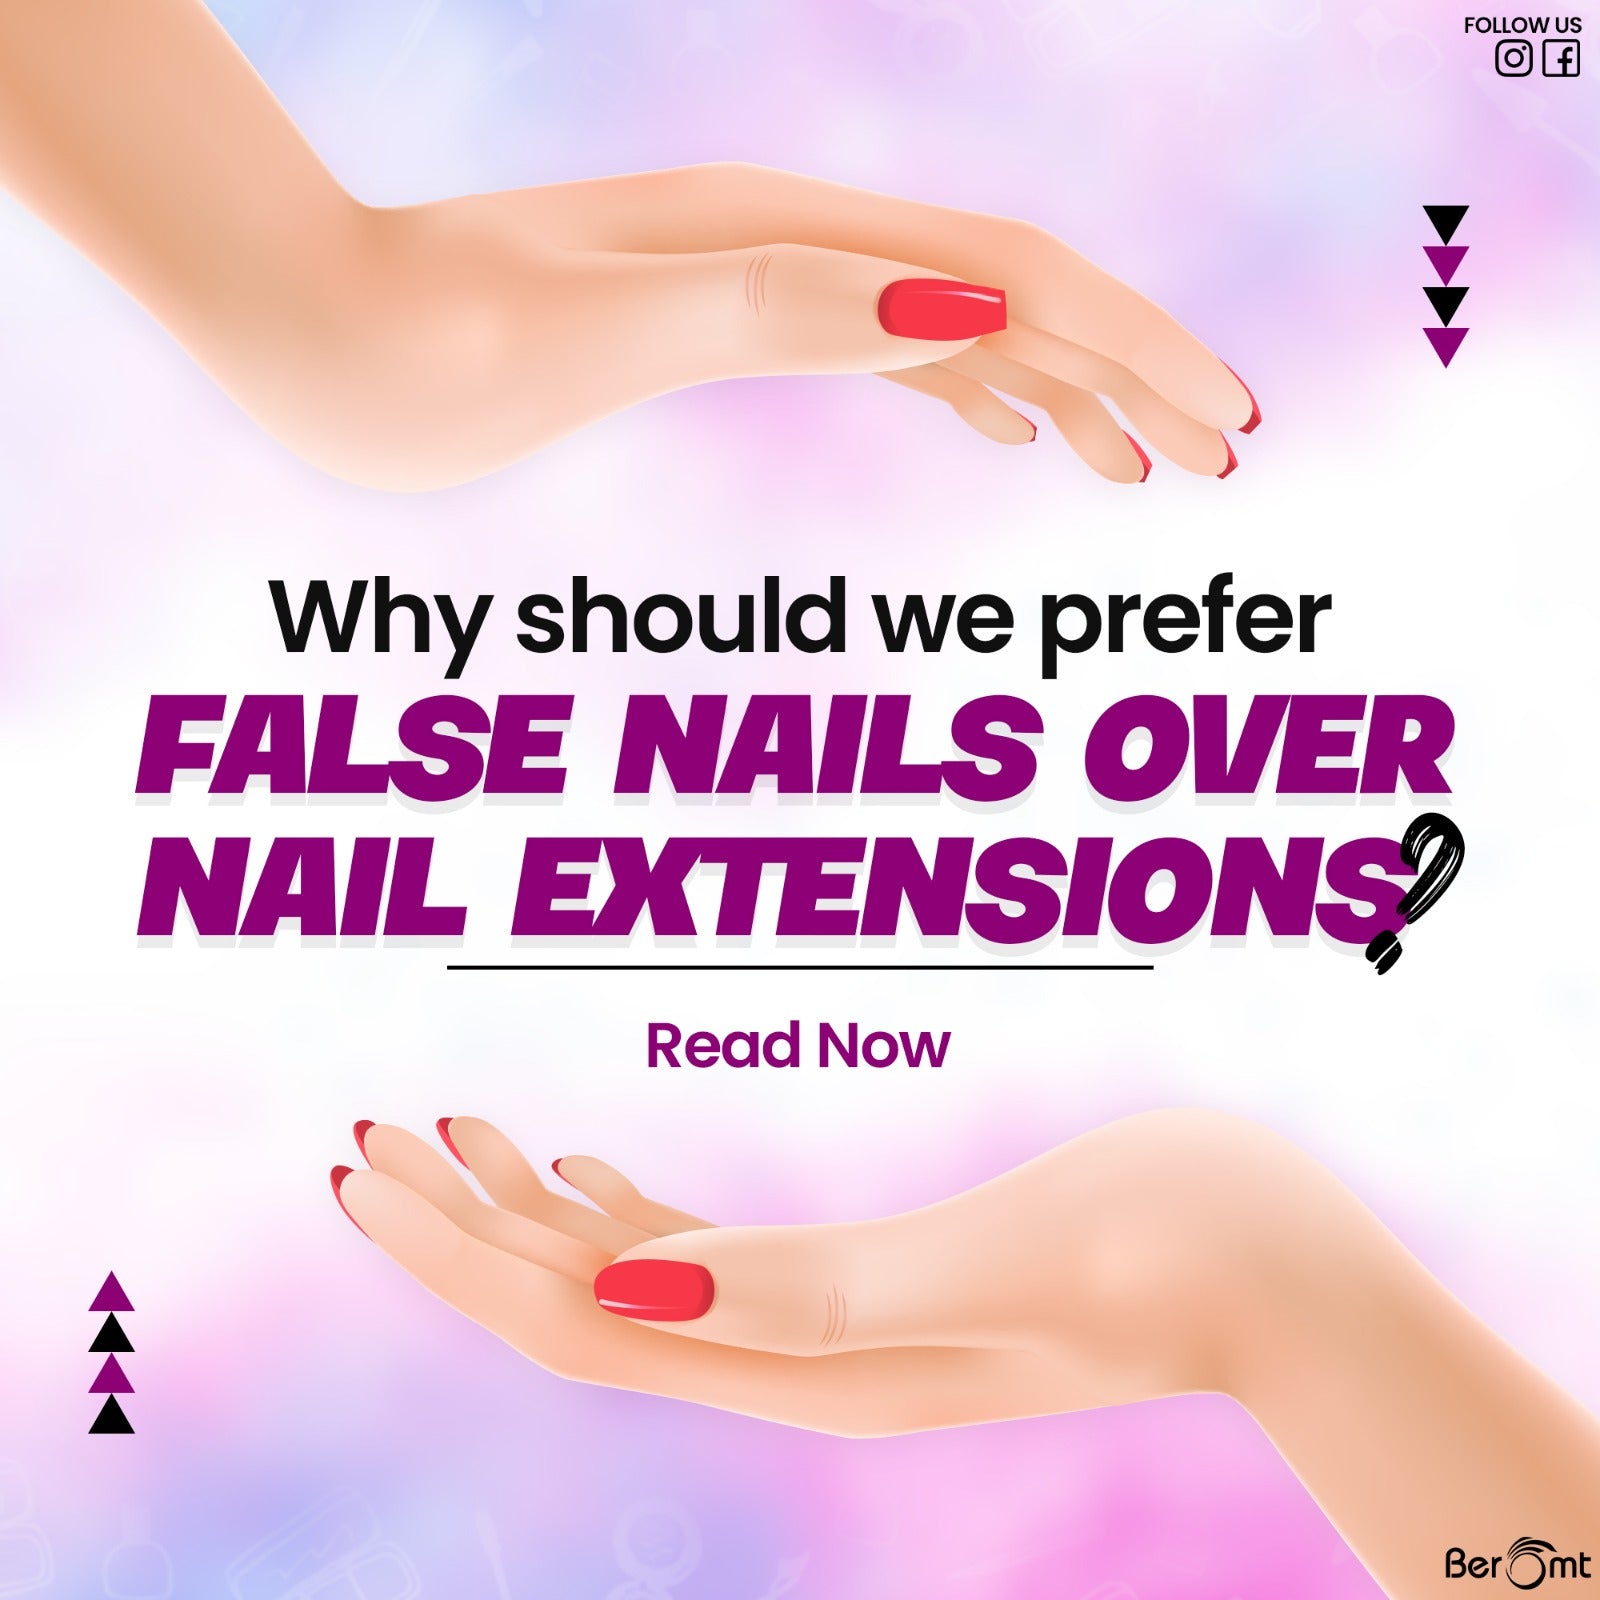 Why should we prefer false nails over nail extensions? – Beromt